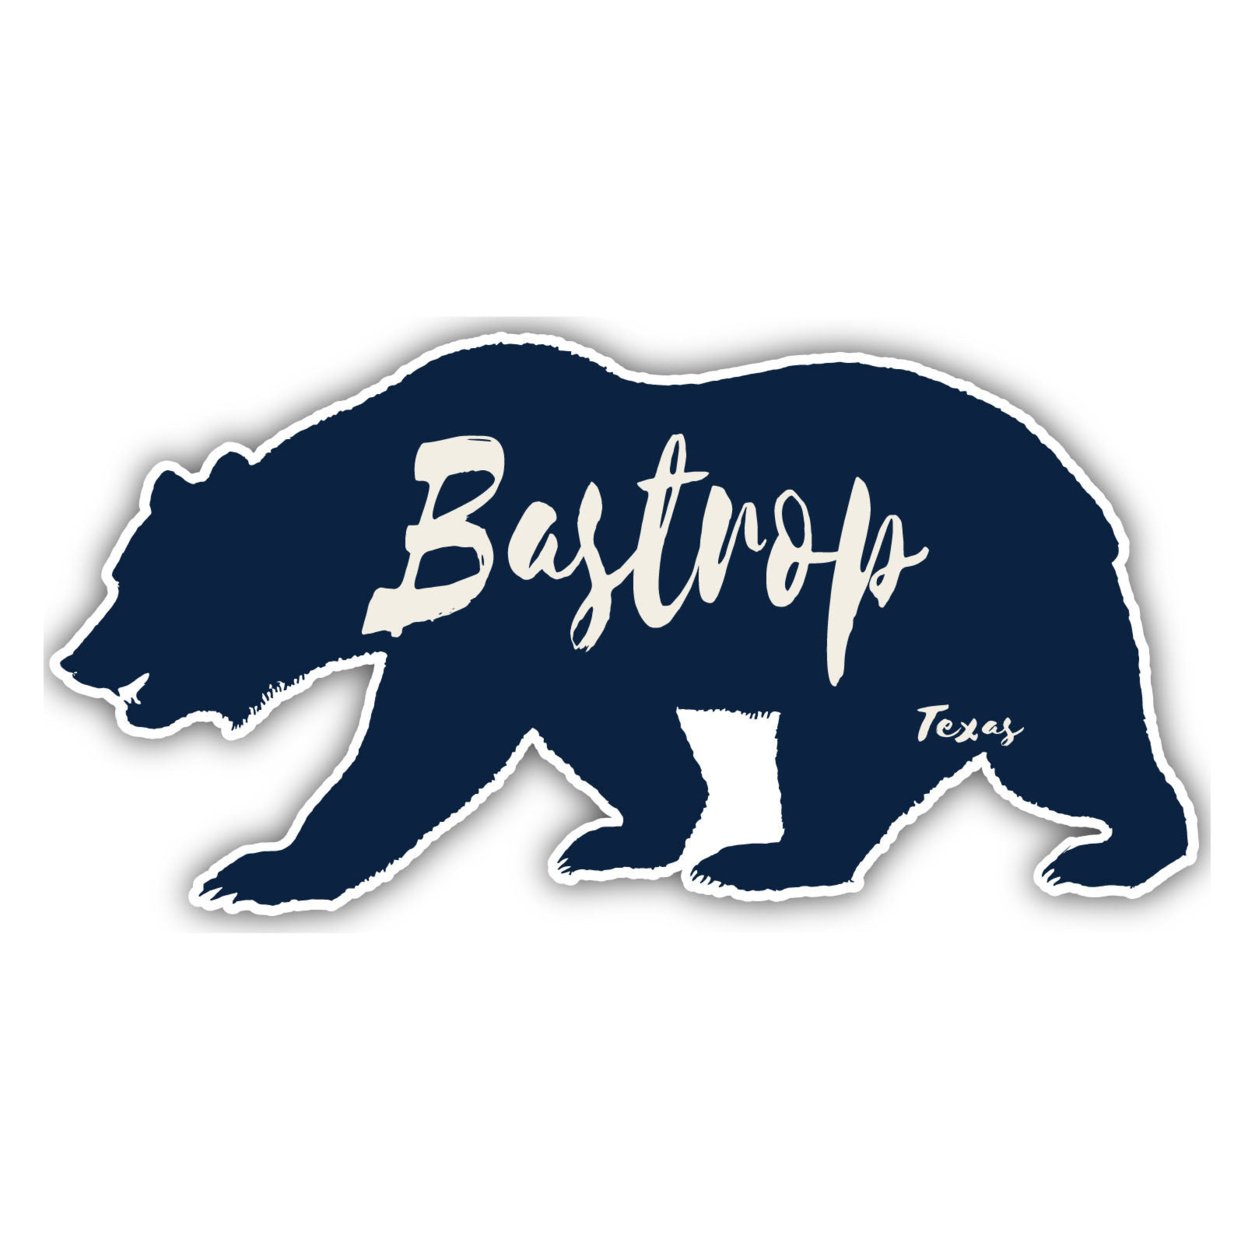 Bastrop Texas Souvenir Decorative Stickers (Choose Theme And Size) - 4-Pack, 10-Inch, Bear